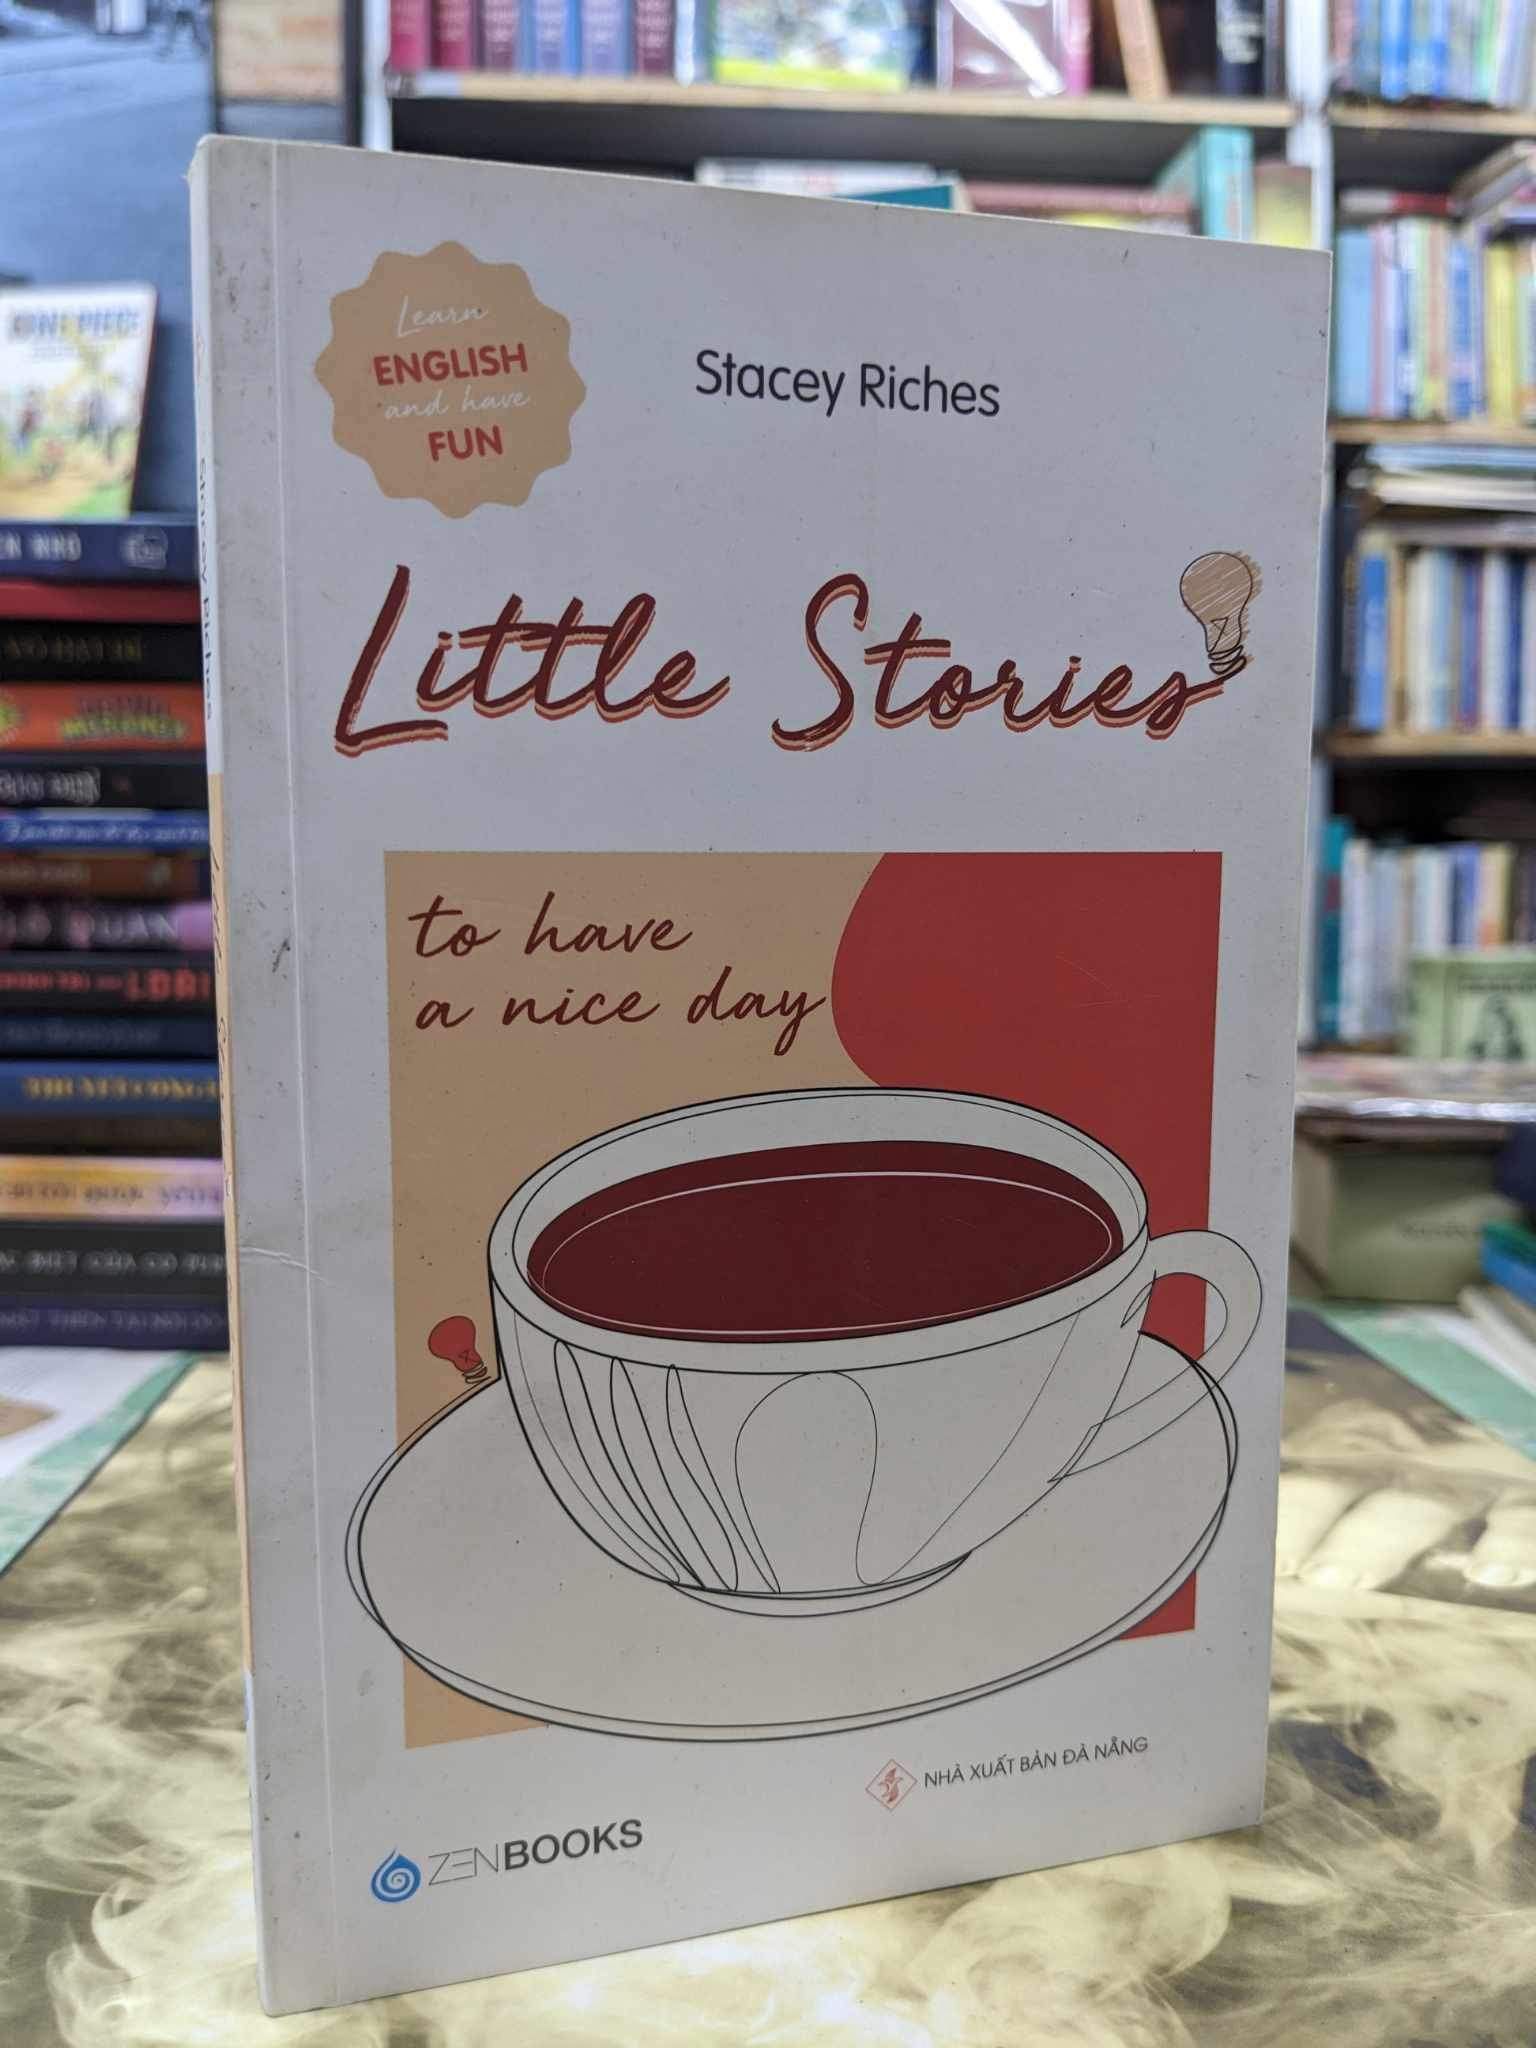  Little Stories to have a nice day - Stacey Riches 